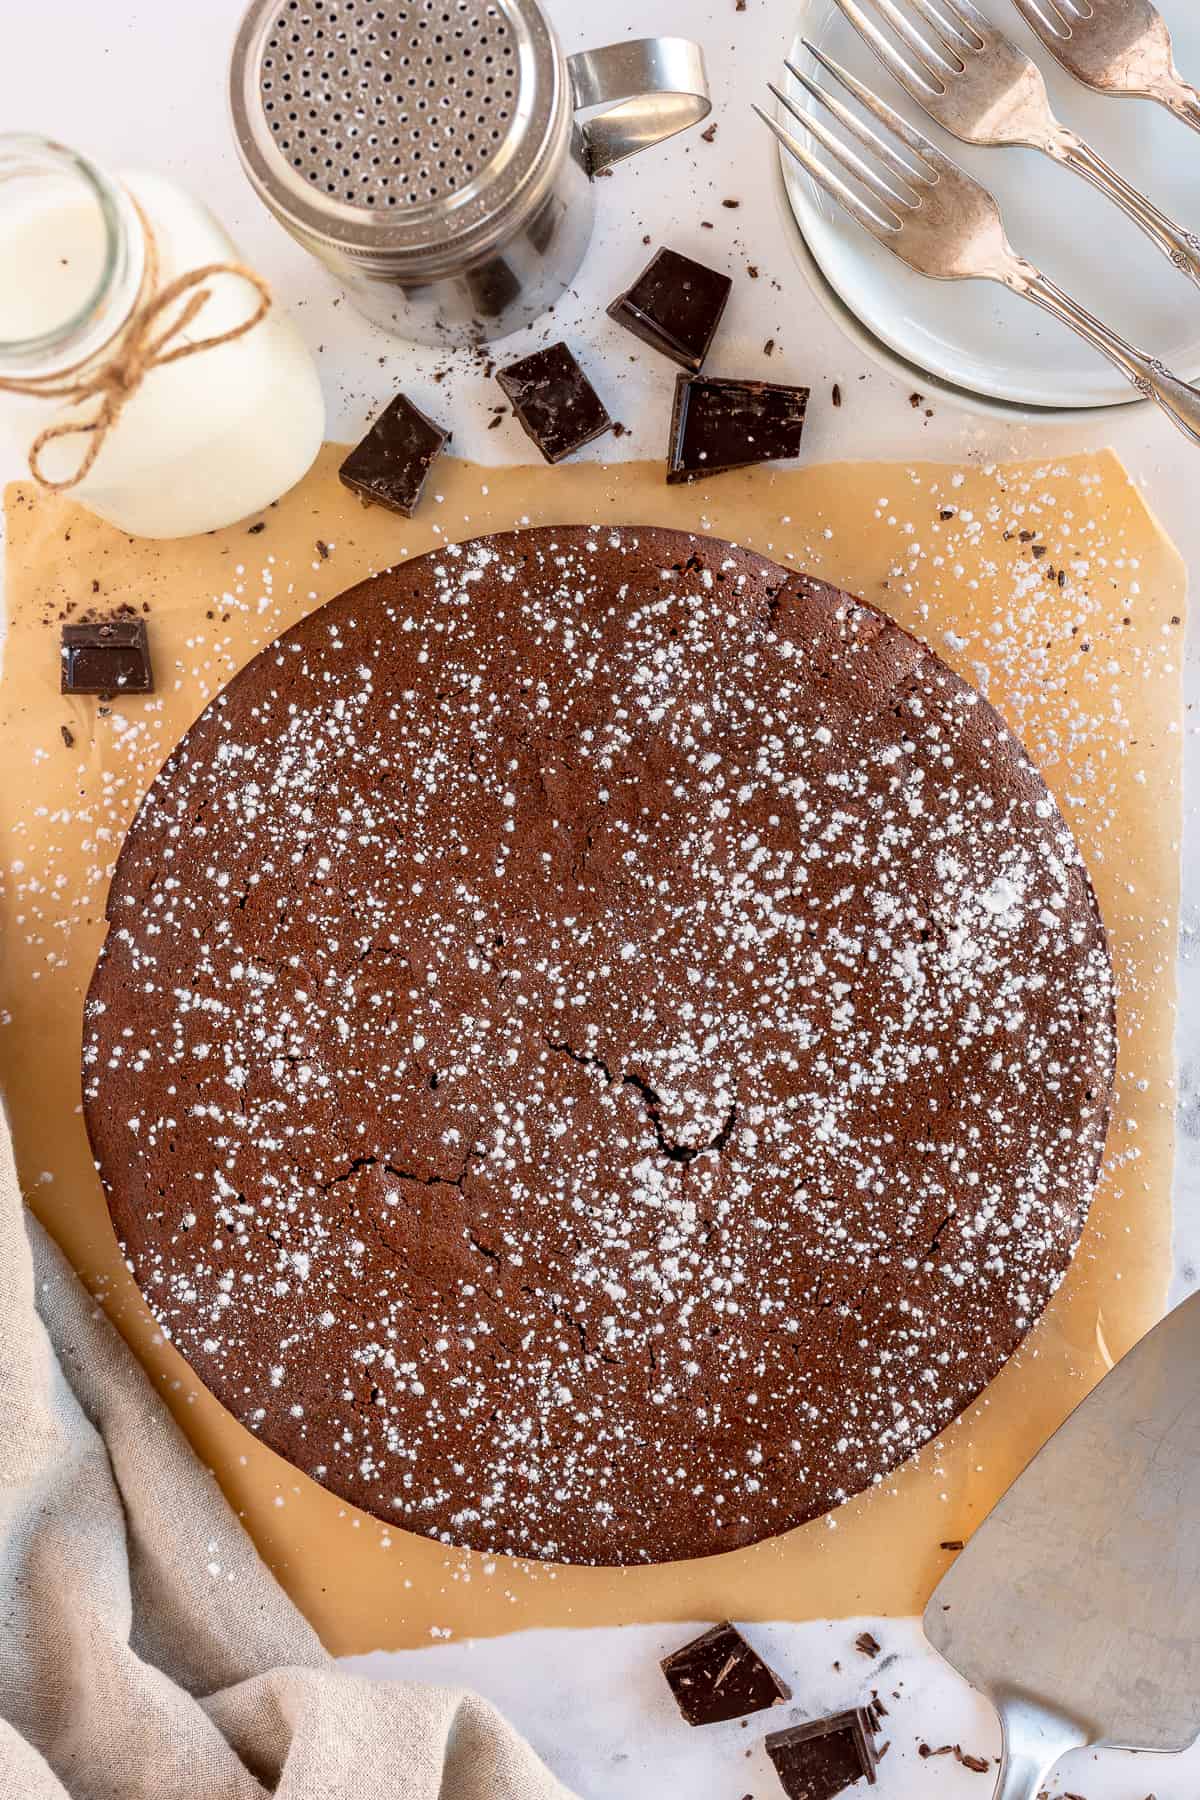 An over the top shot of a French Chocolate Cake dusted with powdered sugar.